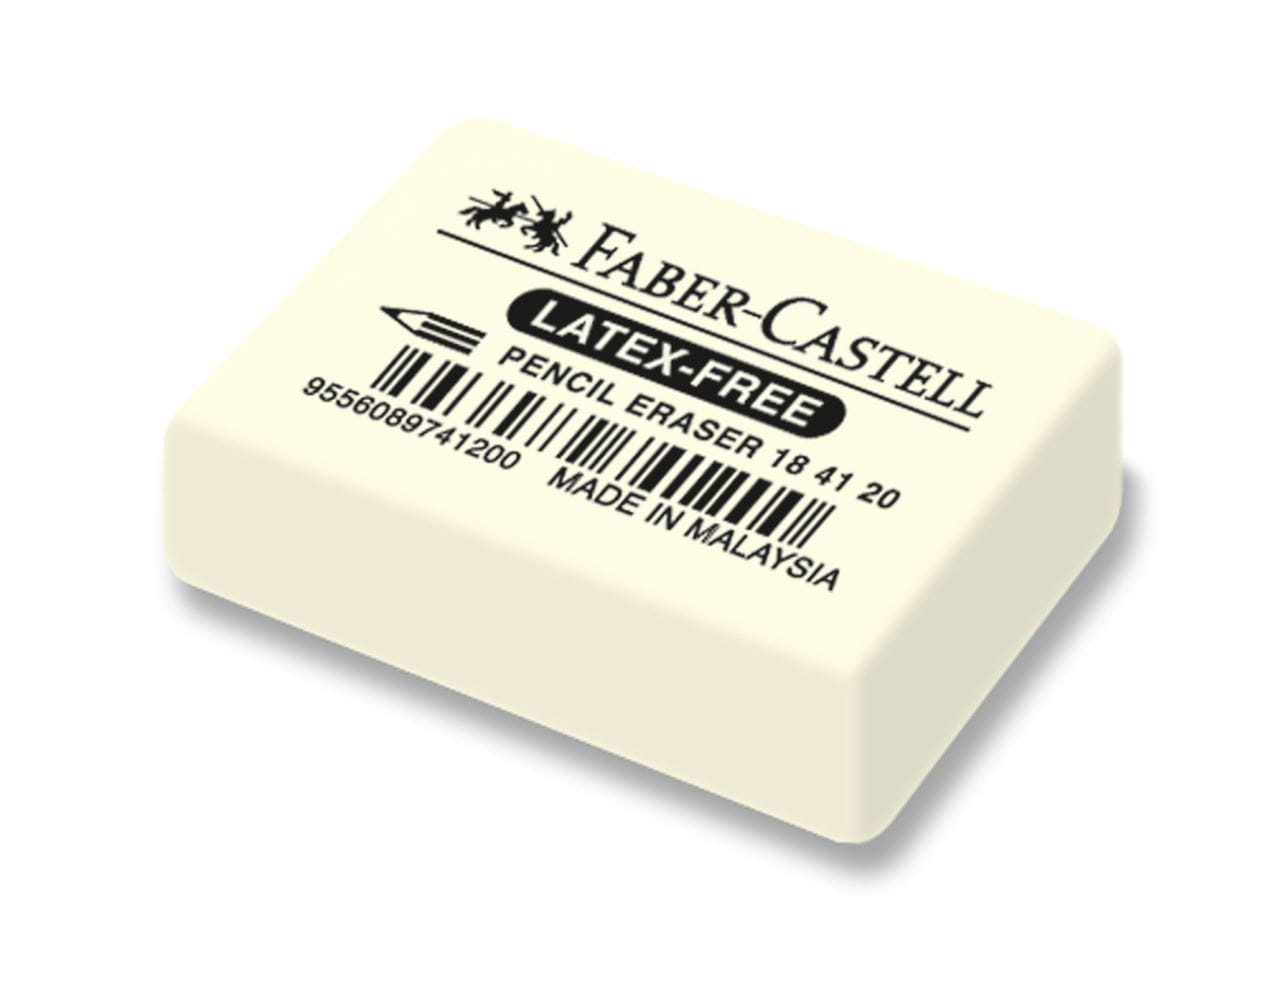 Faber-Castell - 7041-20 Latex-free Radierer